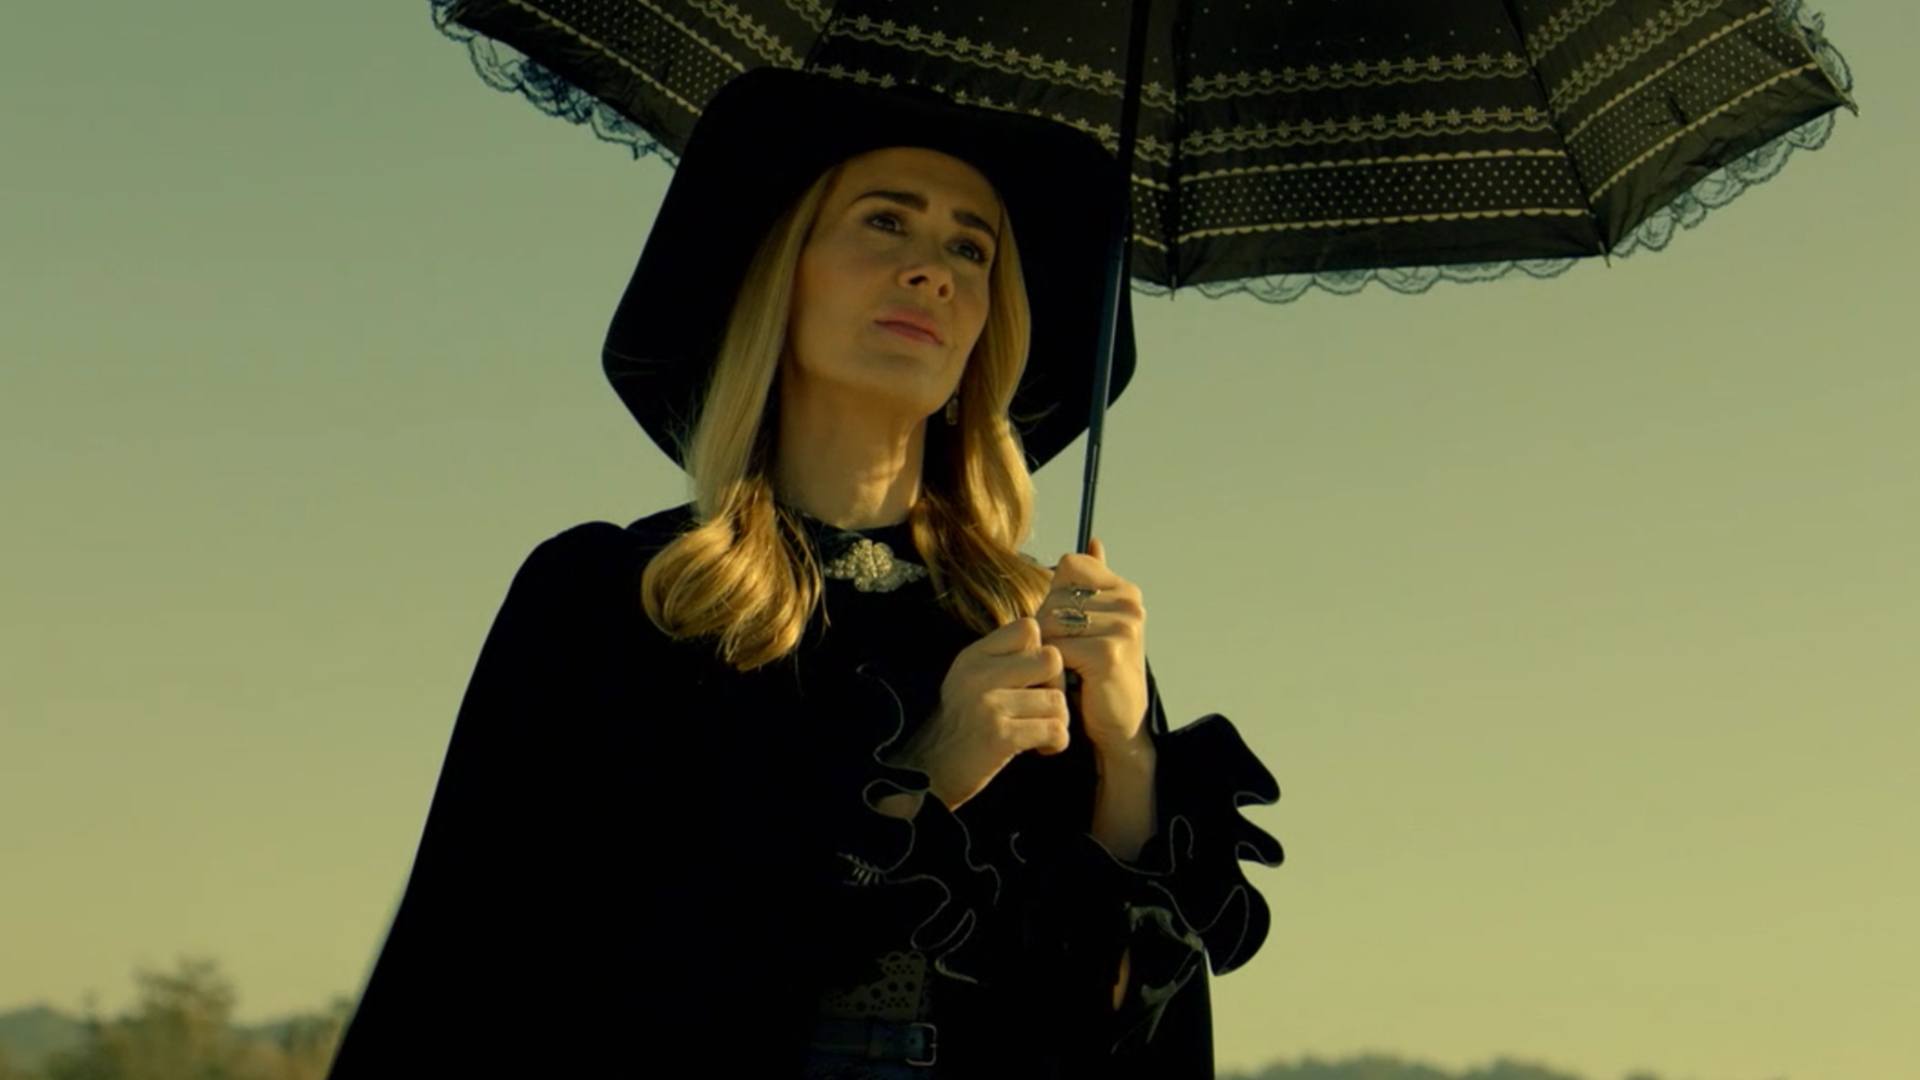 Sarah Paulson Won't Have A Major Role In American Horror Story 1984